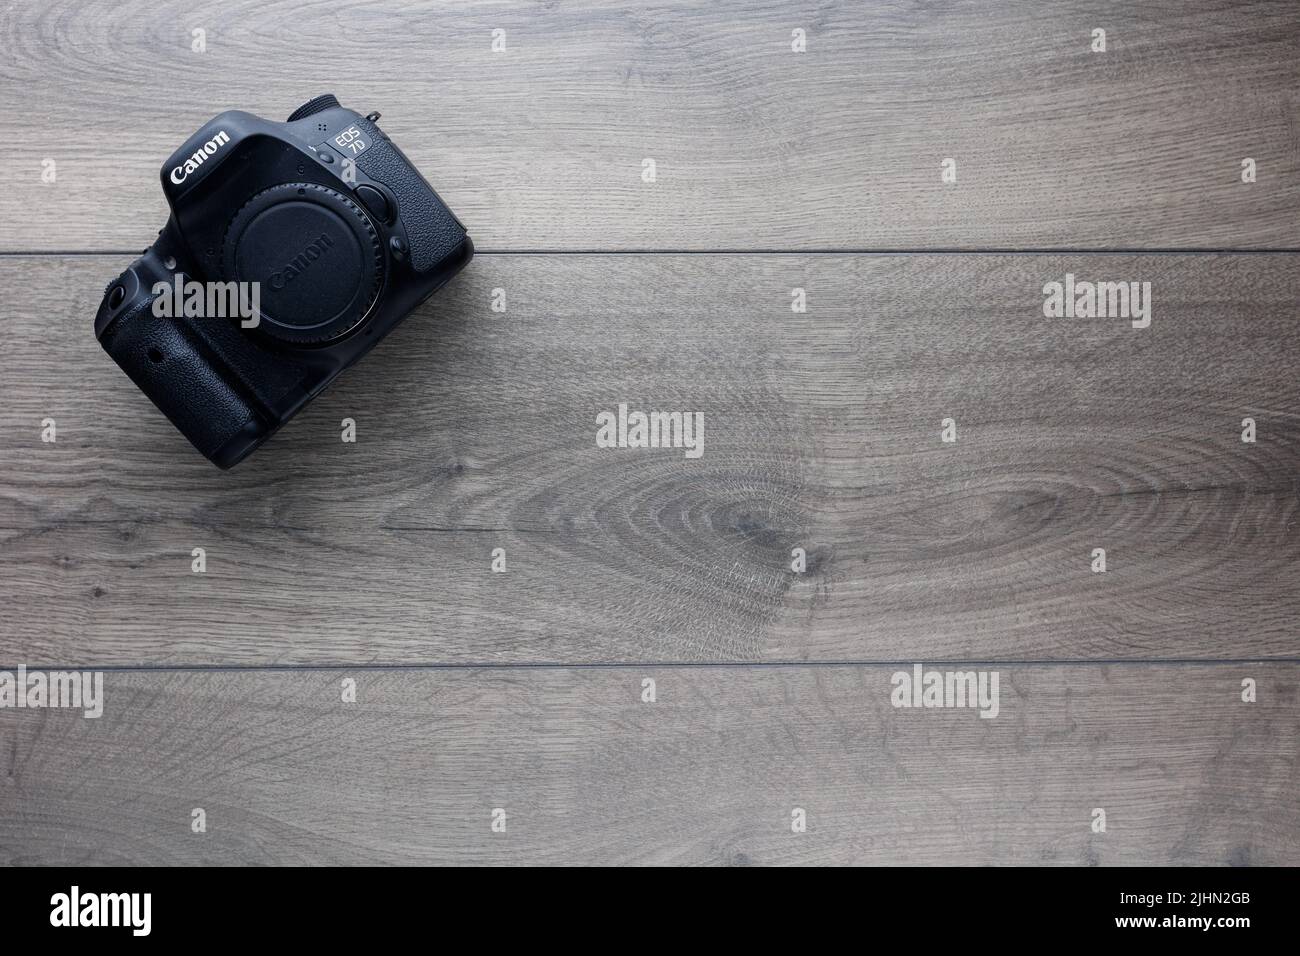 Canon 7D camera flat lay on wooden background Stock Photo